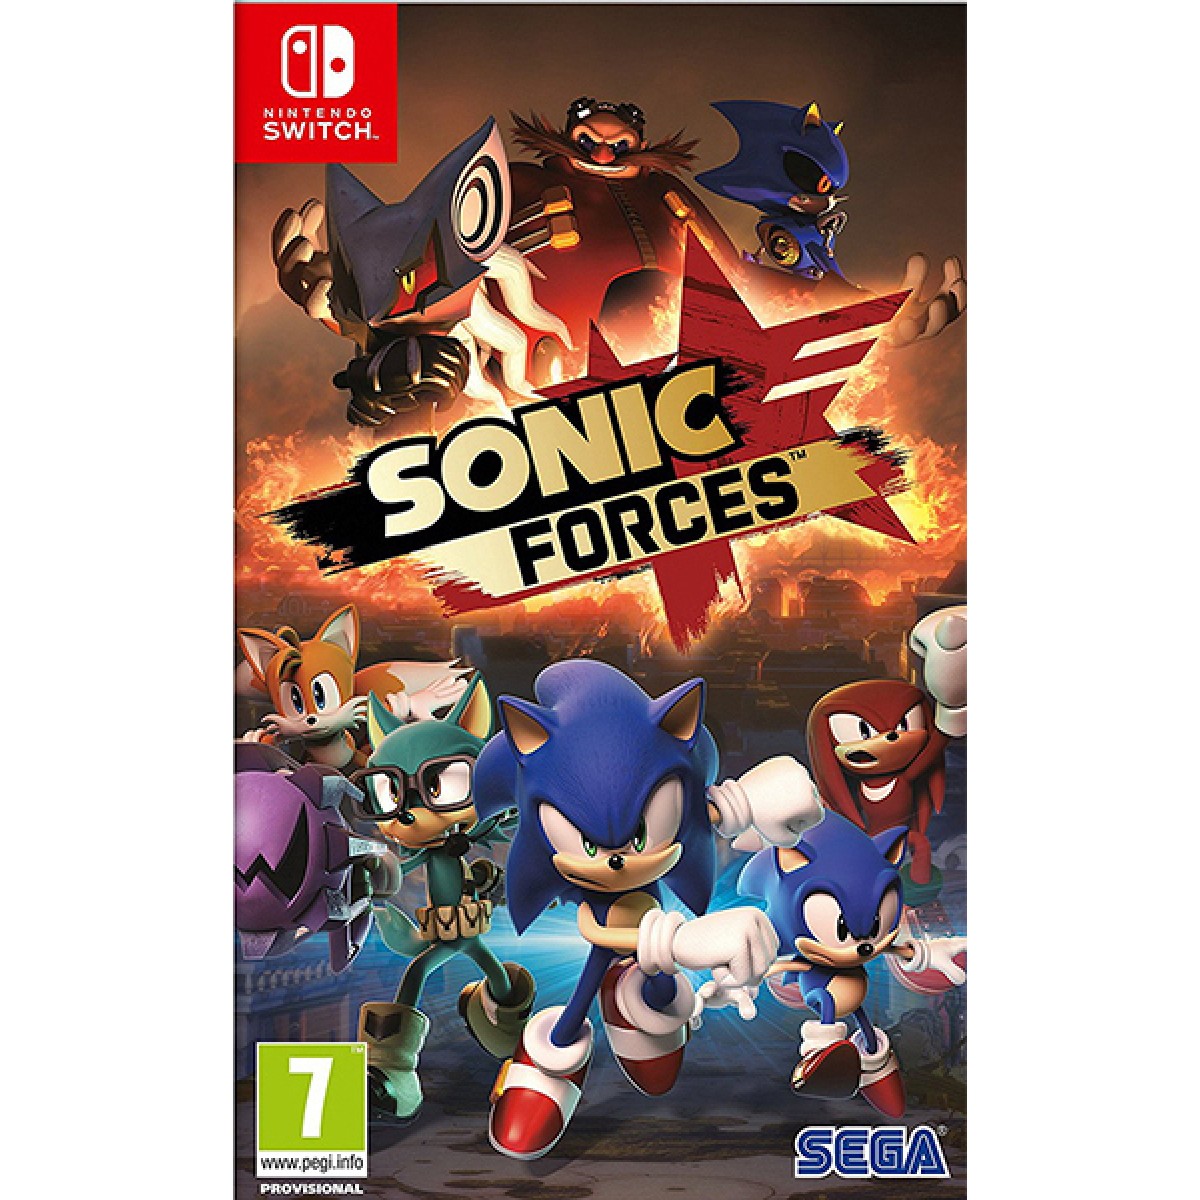 NINTENDO SWITCH SONIC FORCES GAME